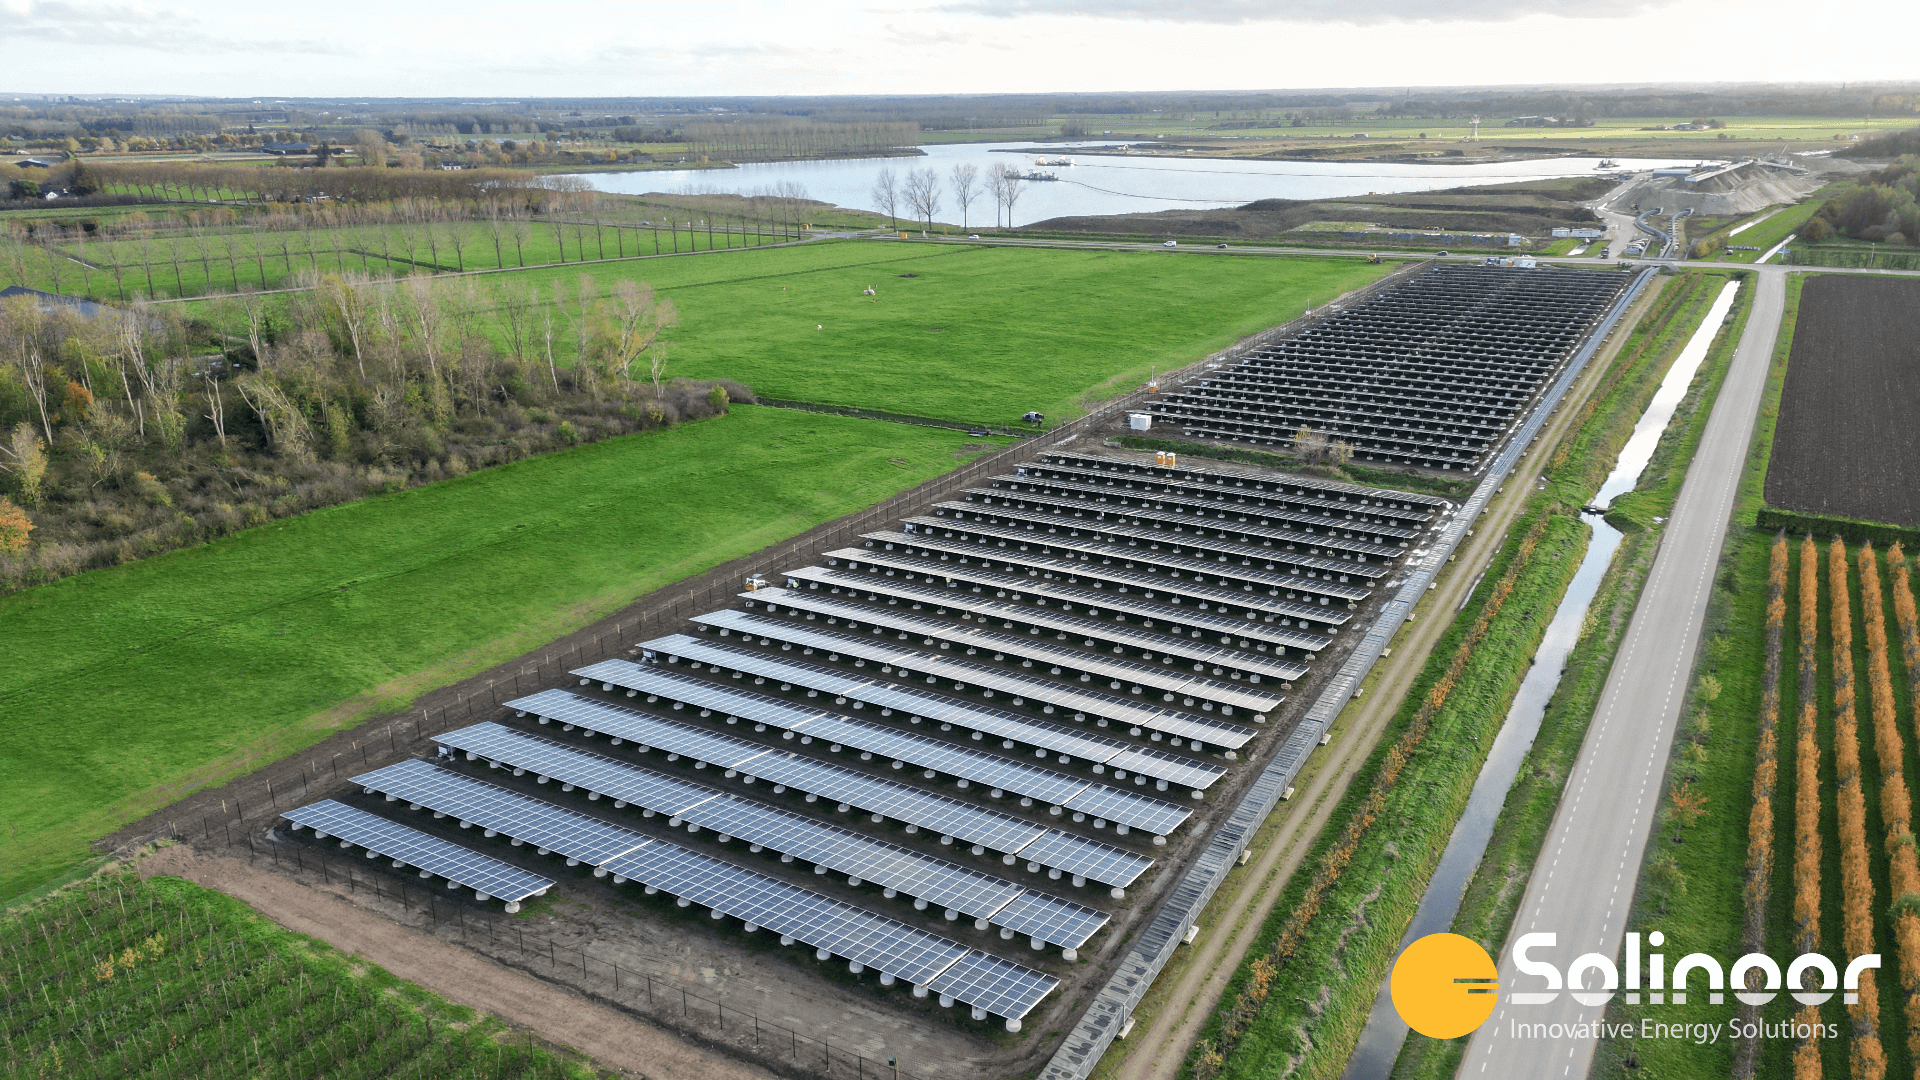 Geertjesgolf solar park complete installation with sand extraction in the background